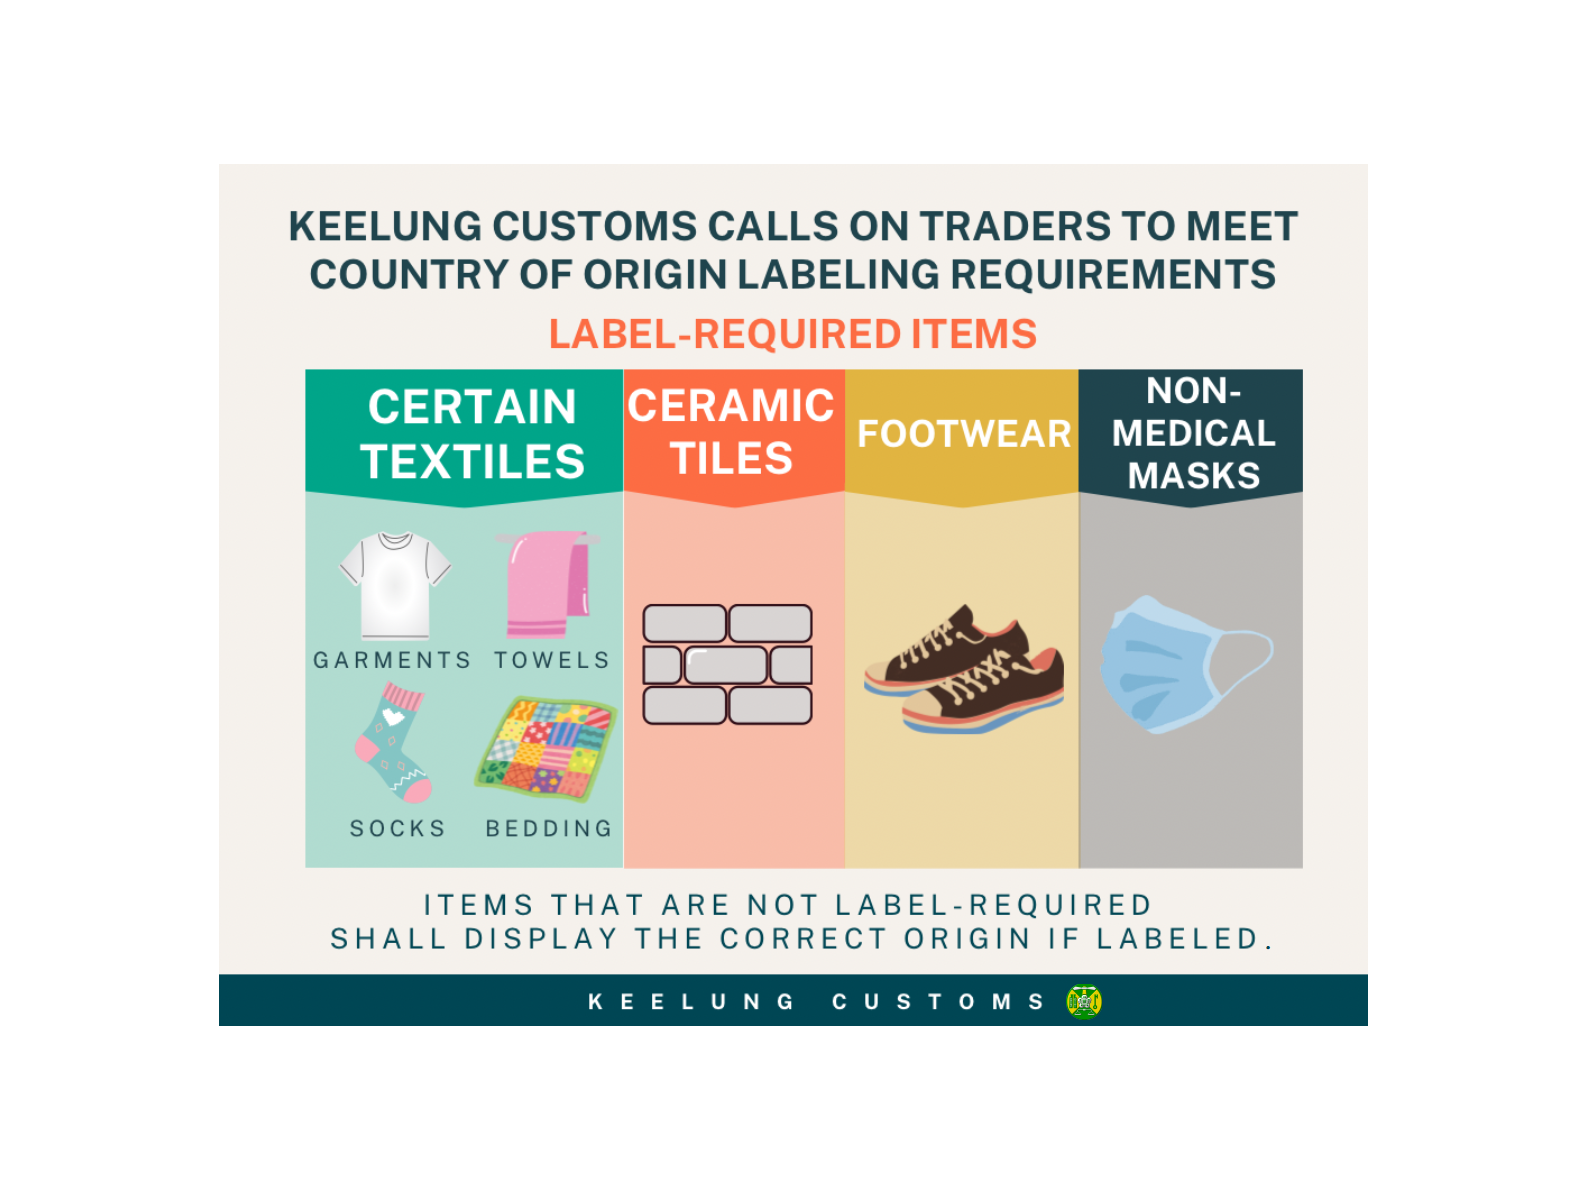 Keelung Customs Calls on Traders to Meet Country of Origin Labeling Requirements